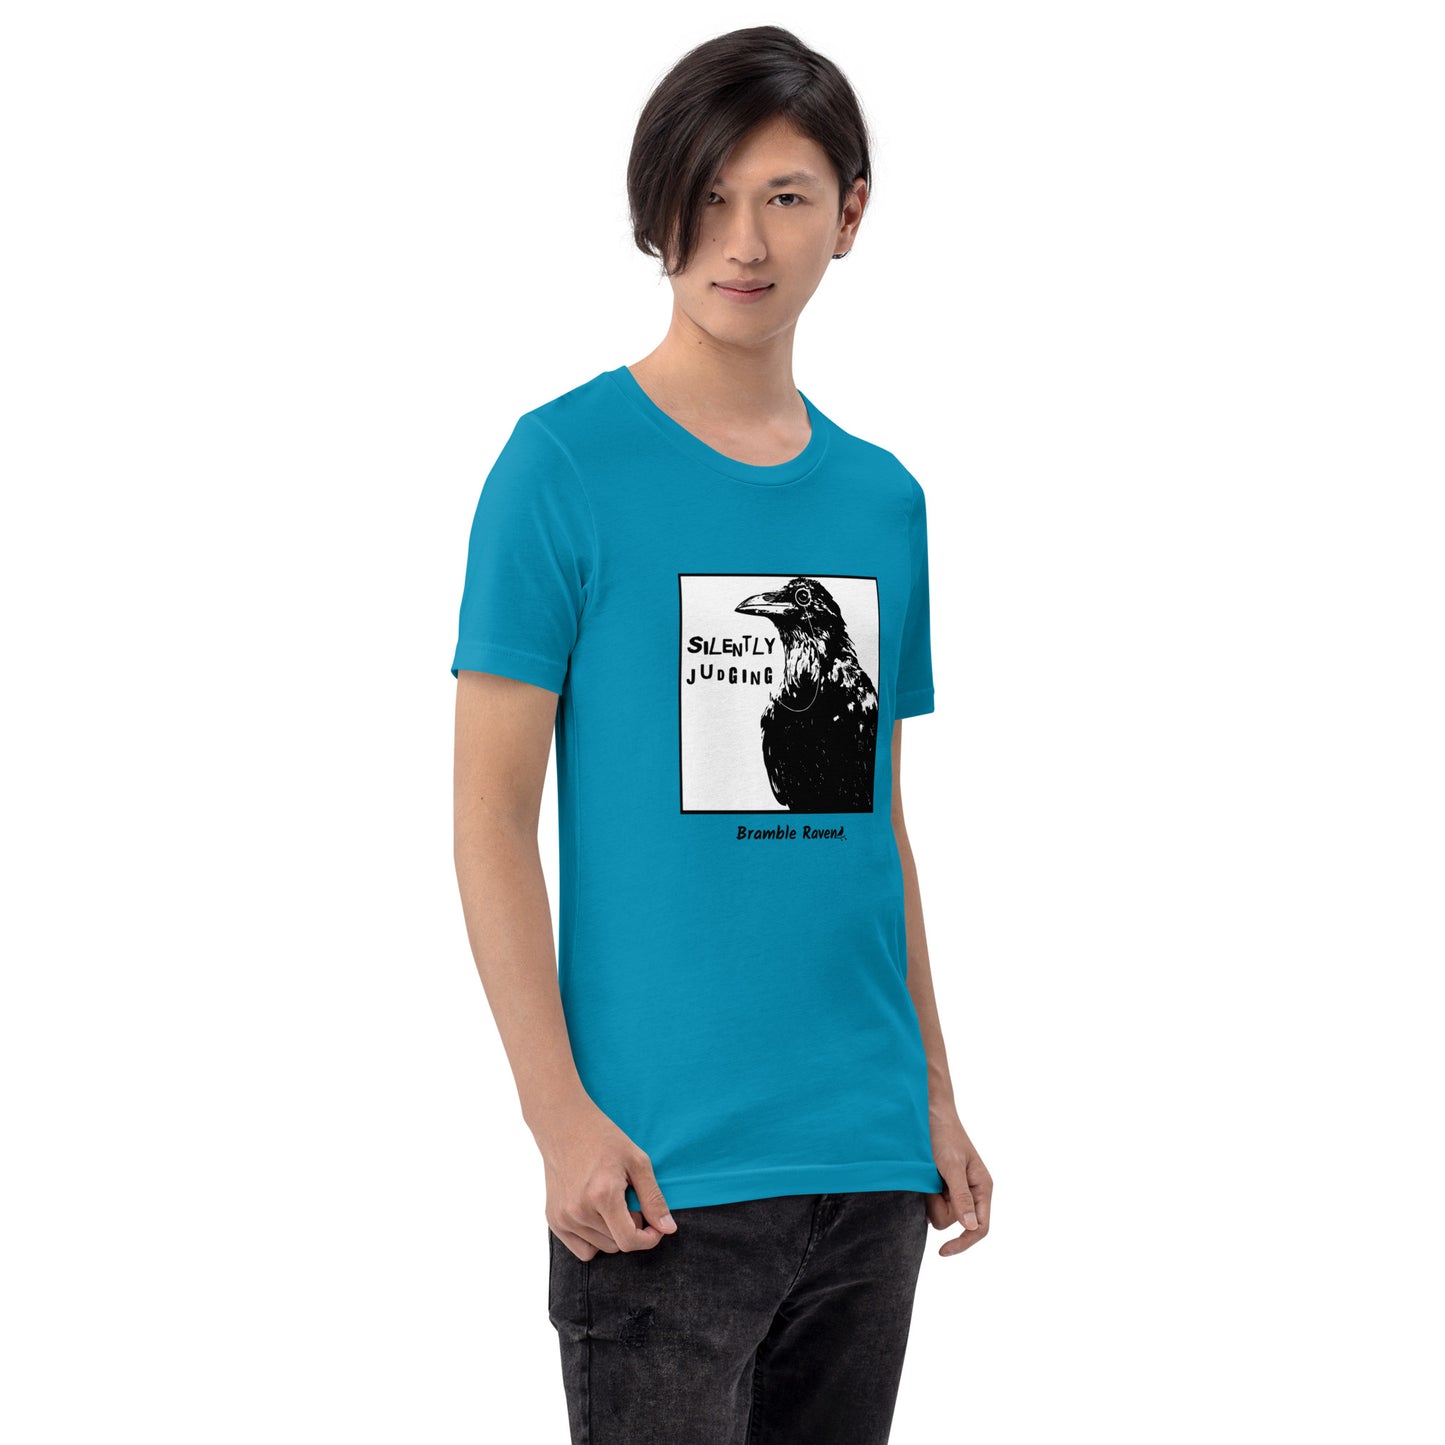 Unisex aqua colored t-shirt. Features silently judging text next to black crow wearing a monocle in a square frame on a white background.  Shown on male model.